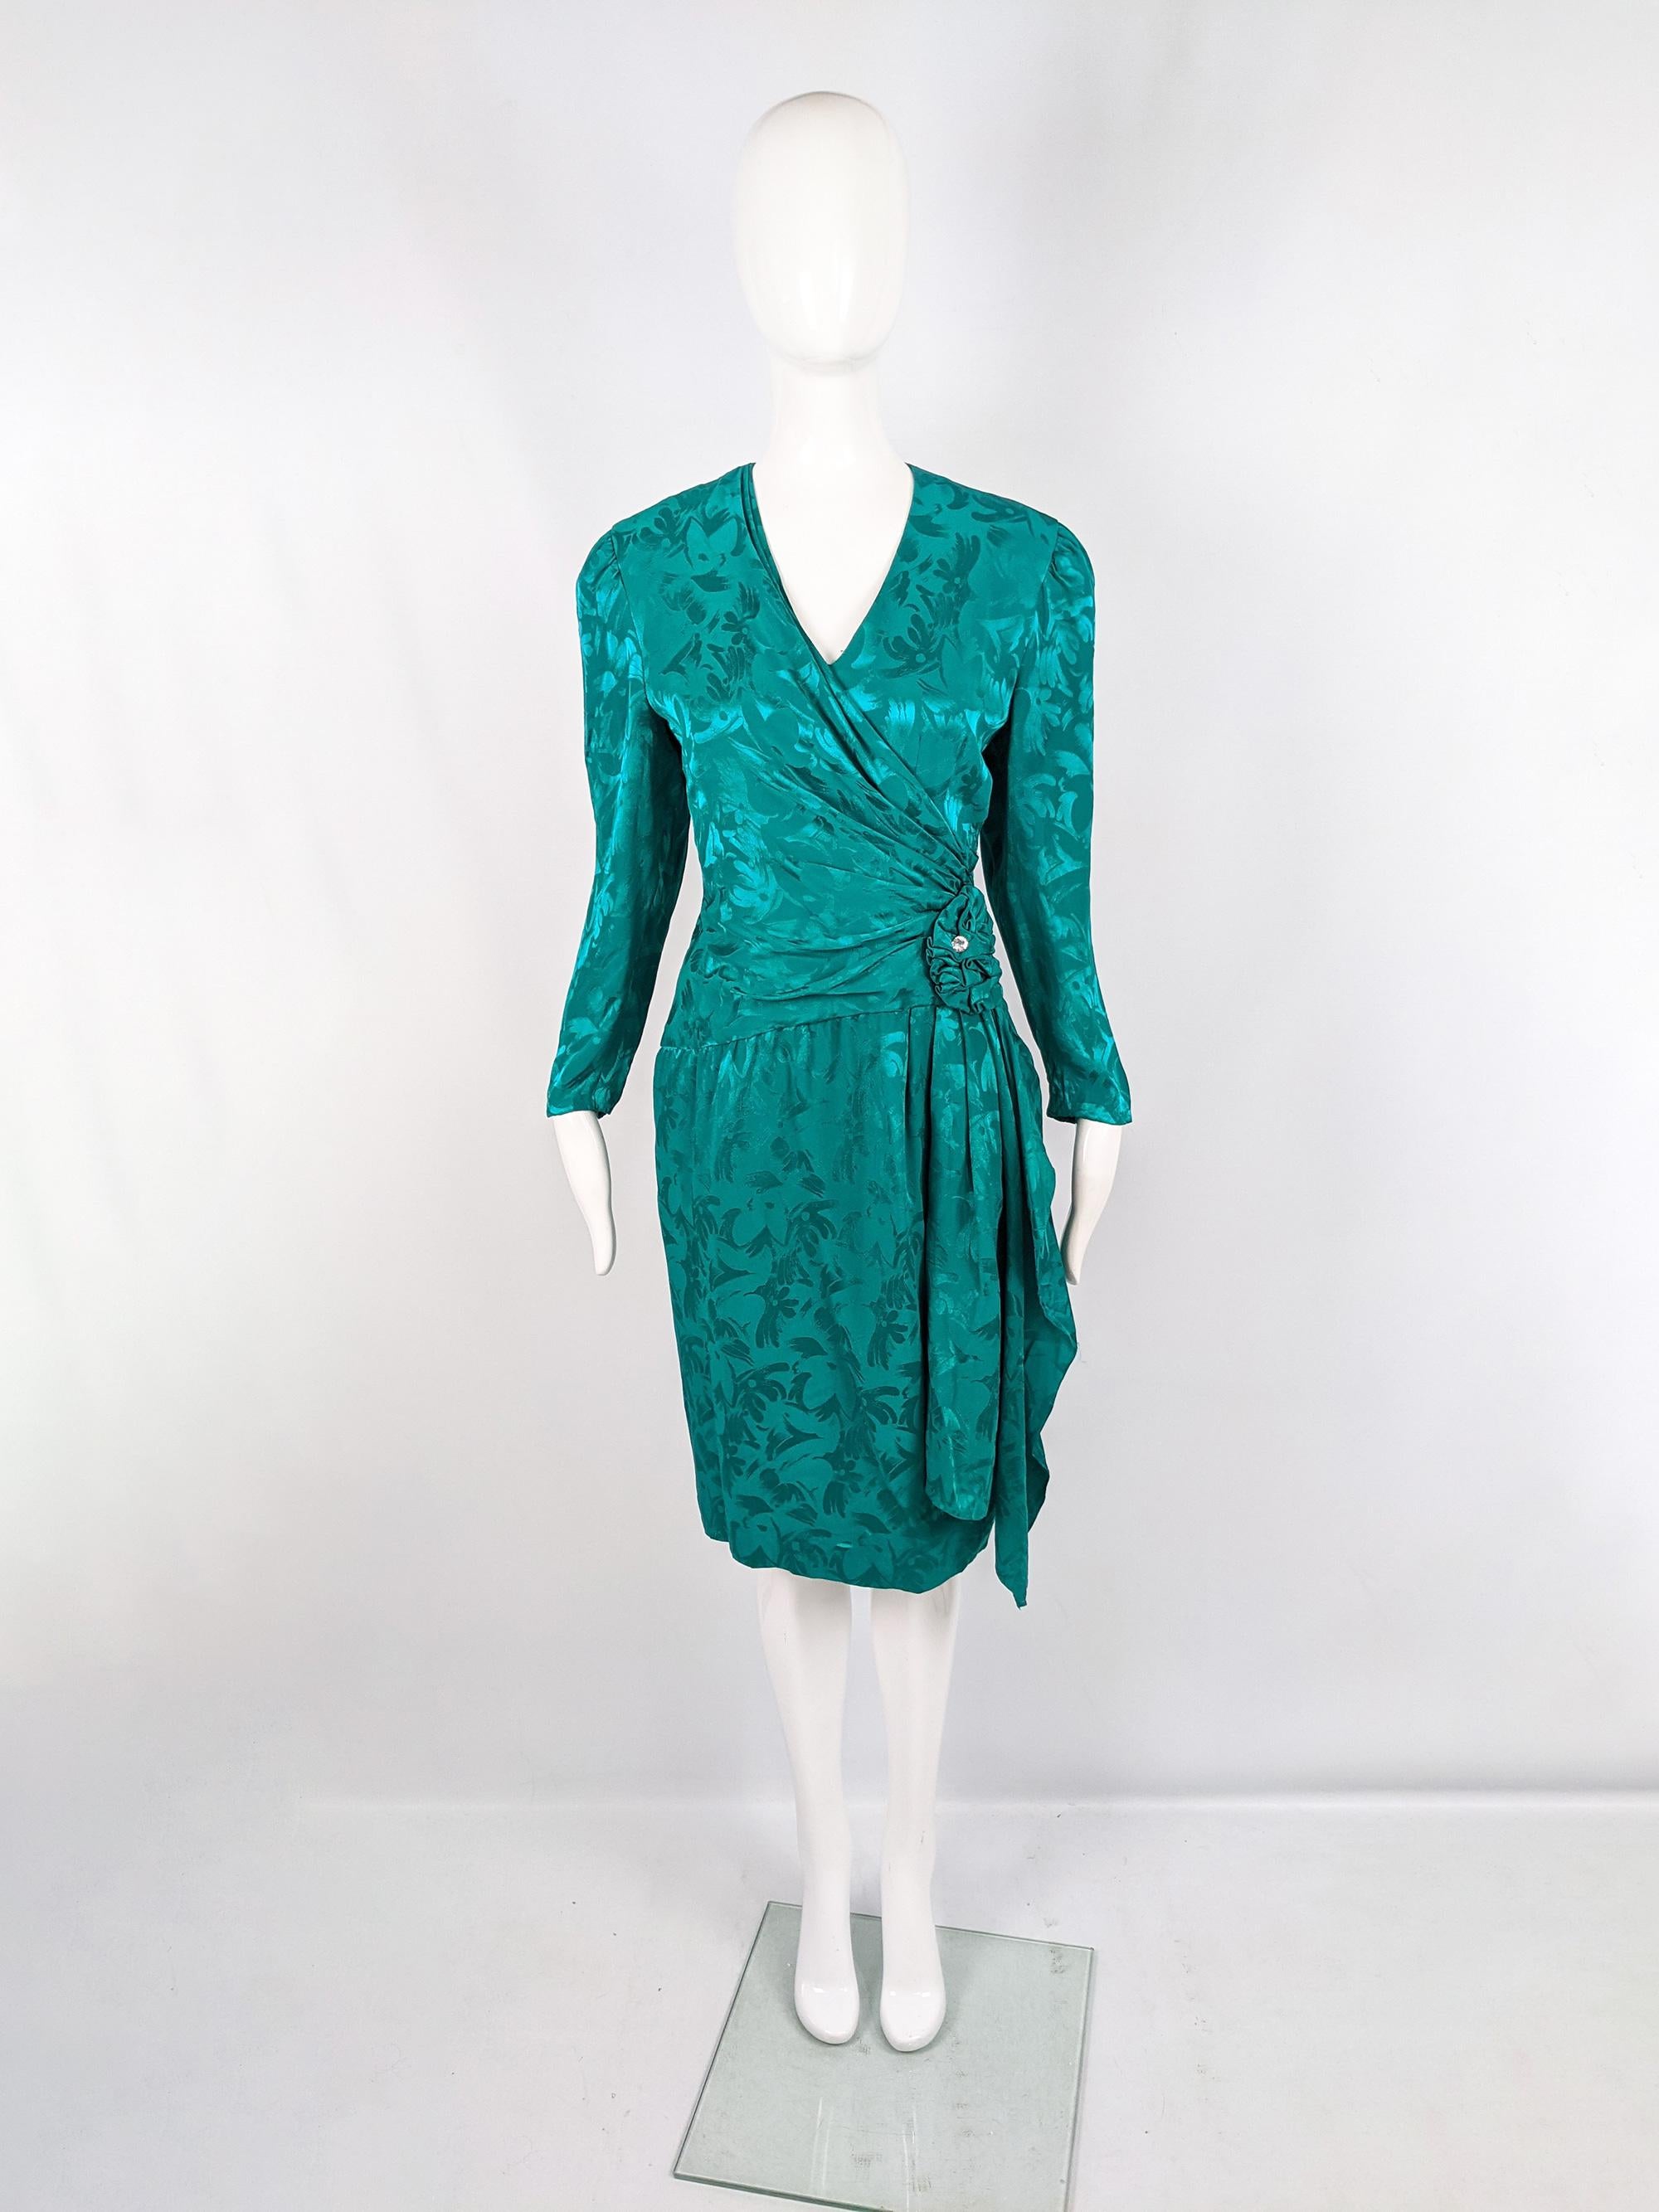 A fabulous vintage womens evening dress from the 80s by quality American designer, A.J Bari. In an emerald green pure silk fabric with a satin jacquard pattern woven throughout. It has a crossover front, ruched detail at the side with a single